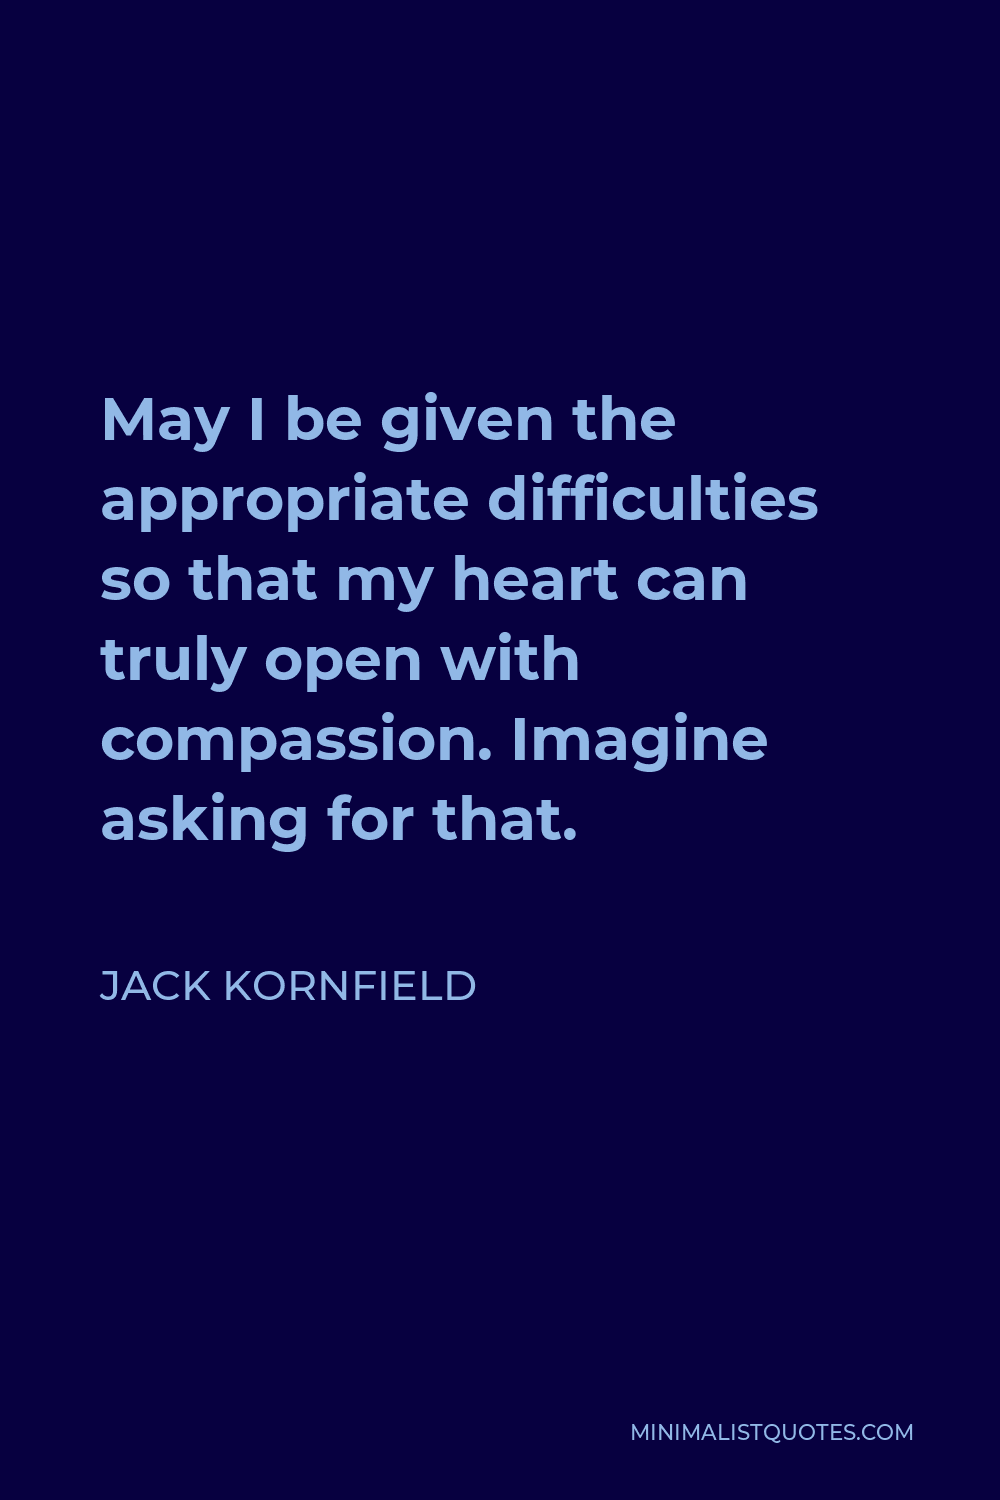 Jack Kornfield Quote - May I be given the appropriate difficulties so that my heart can truly open with compassion. Imagine asking for that.